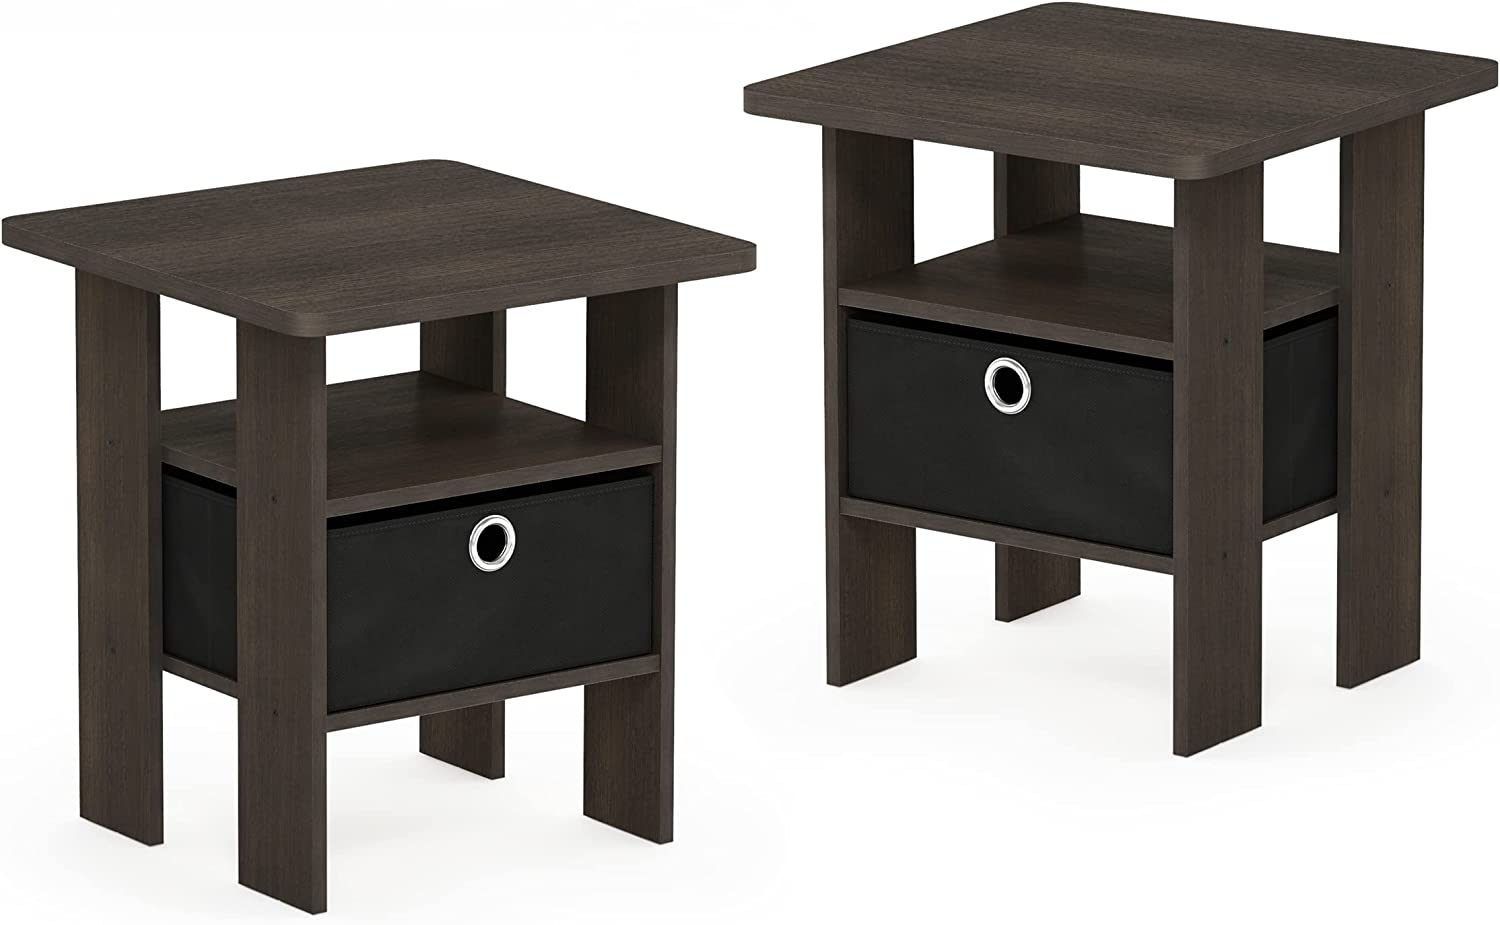 2-Count Furinno Andrey Night Stand Table w/ Bin Drawer: Dark Brown/Black $24.03, French Oak Grey $27.99 + Free Shipping w/ Prime or Orders $25+